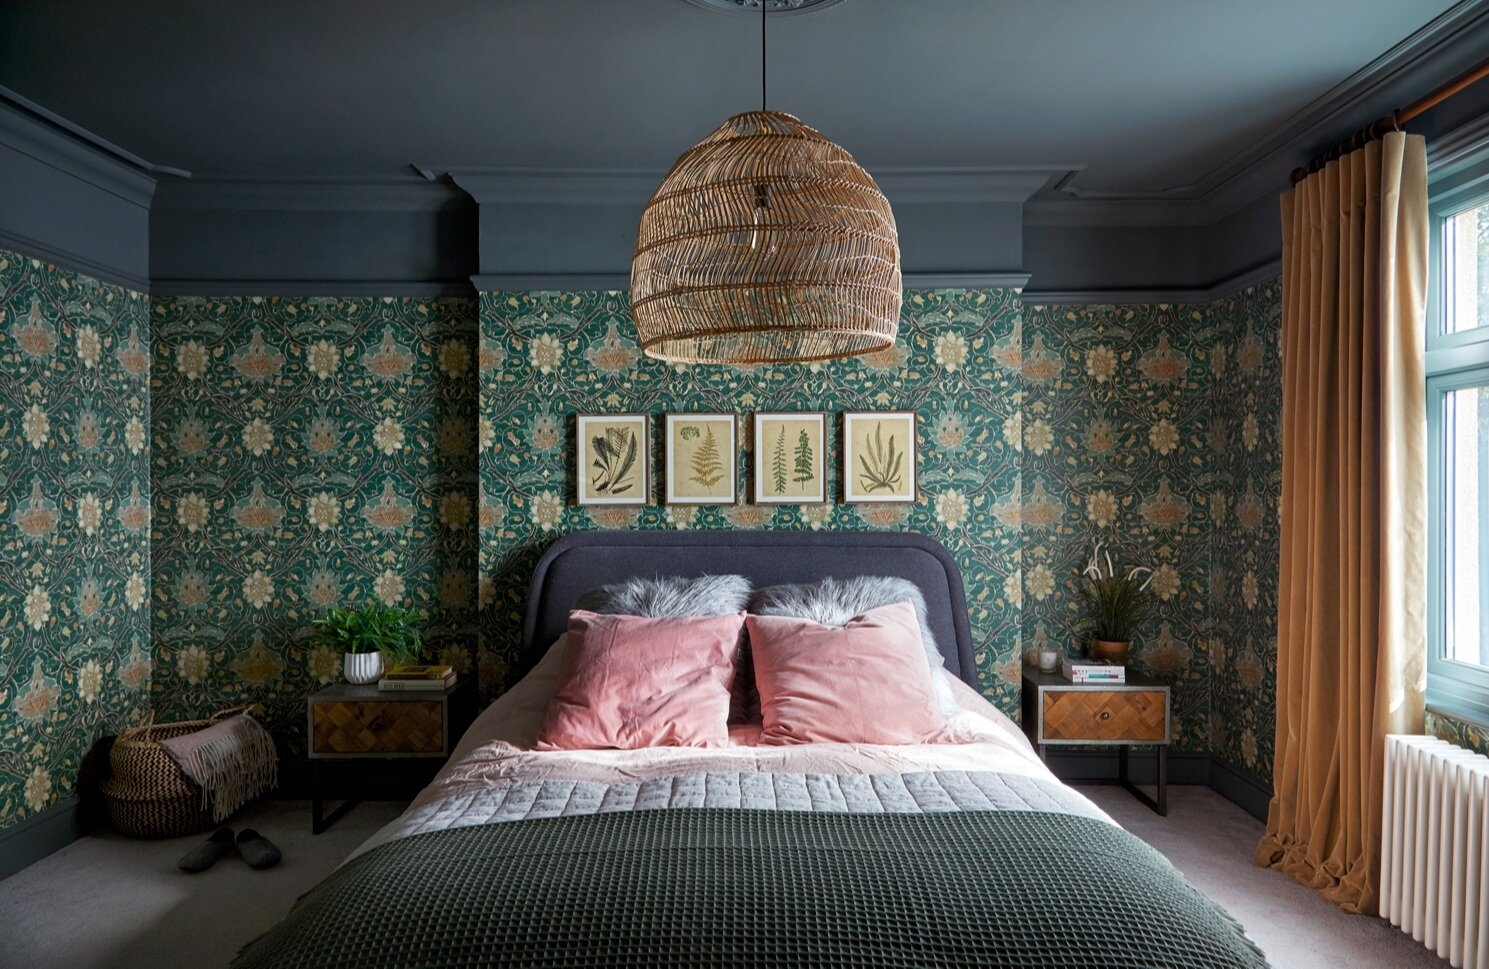 Bedroom with a patterned green wallpaper